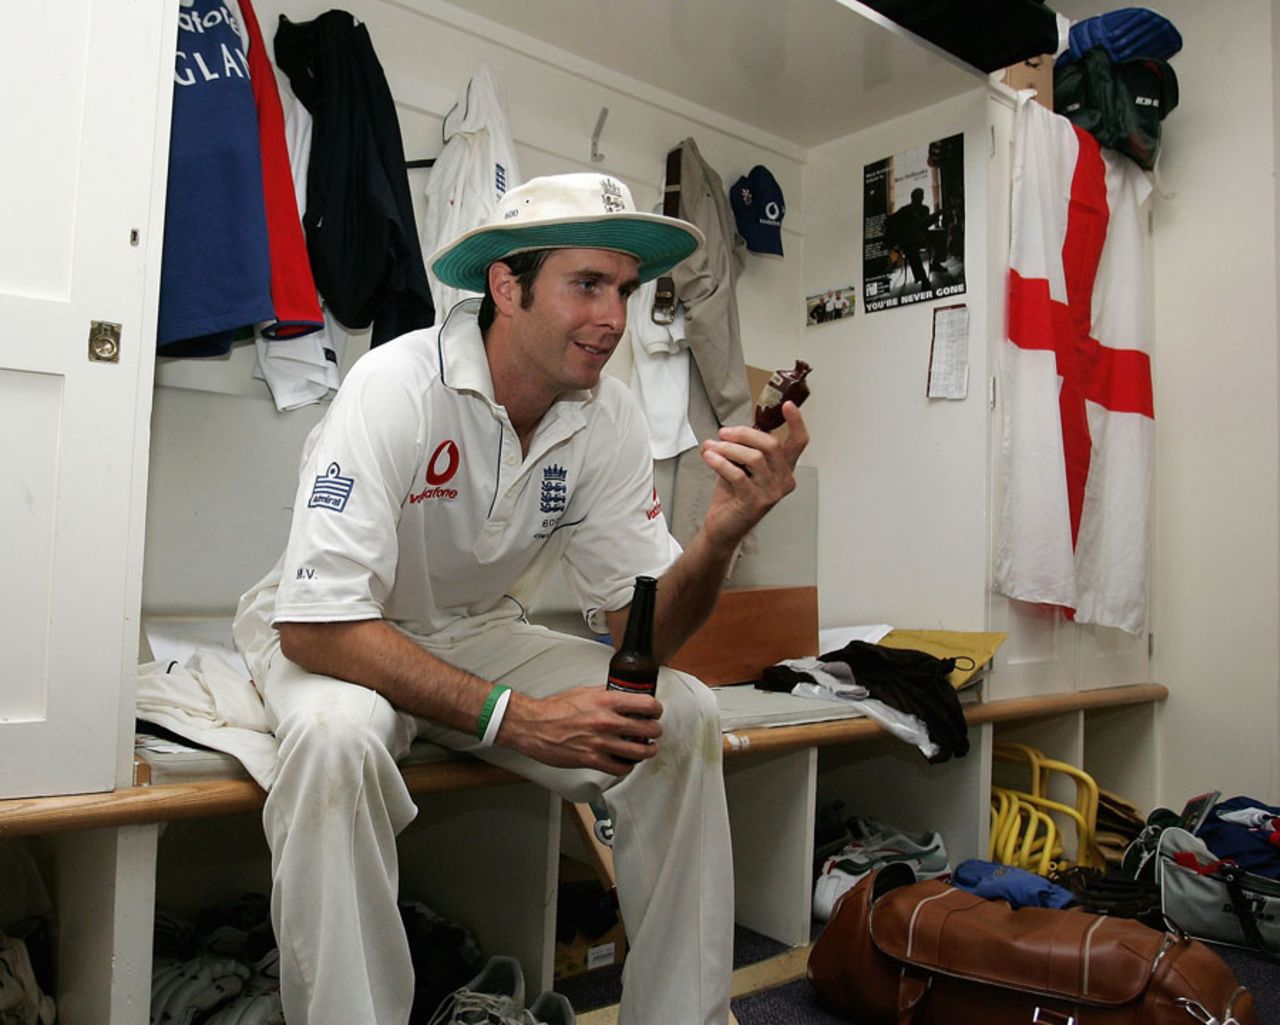 Michael Vaughan savours the Ashes victory, England v Australia, The Oval, September 12, 2005